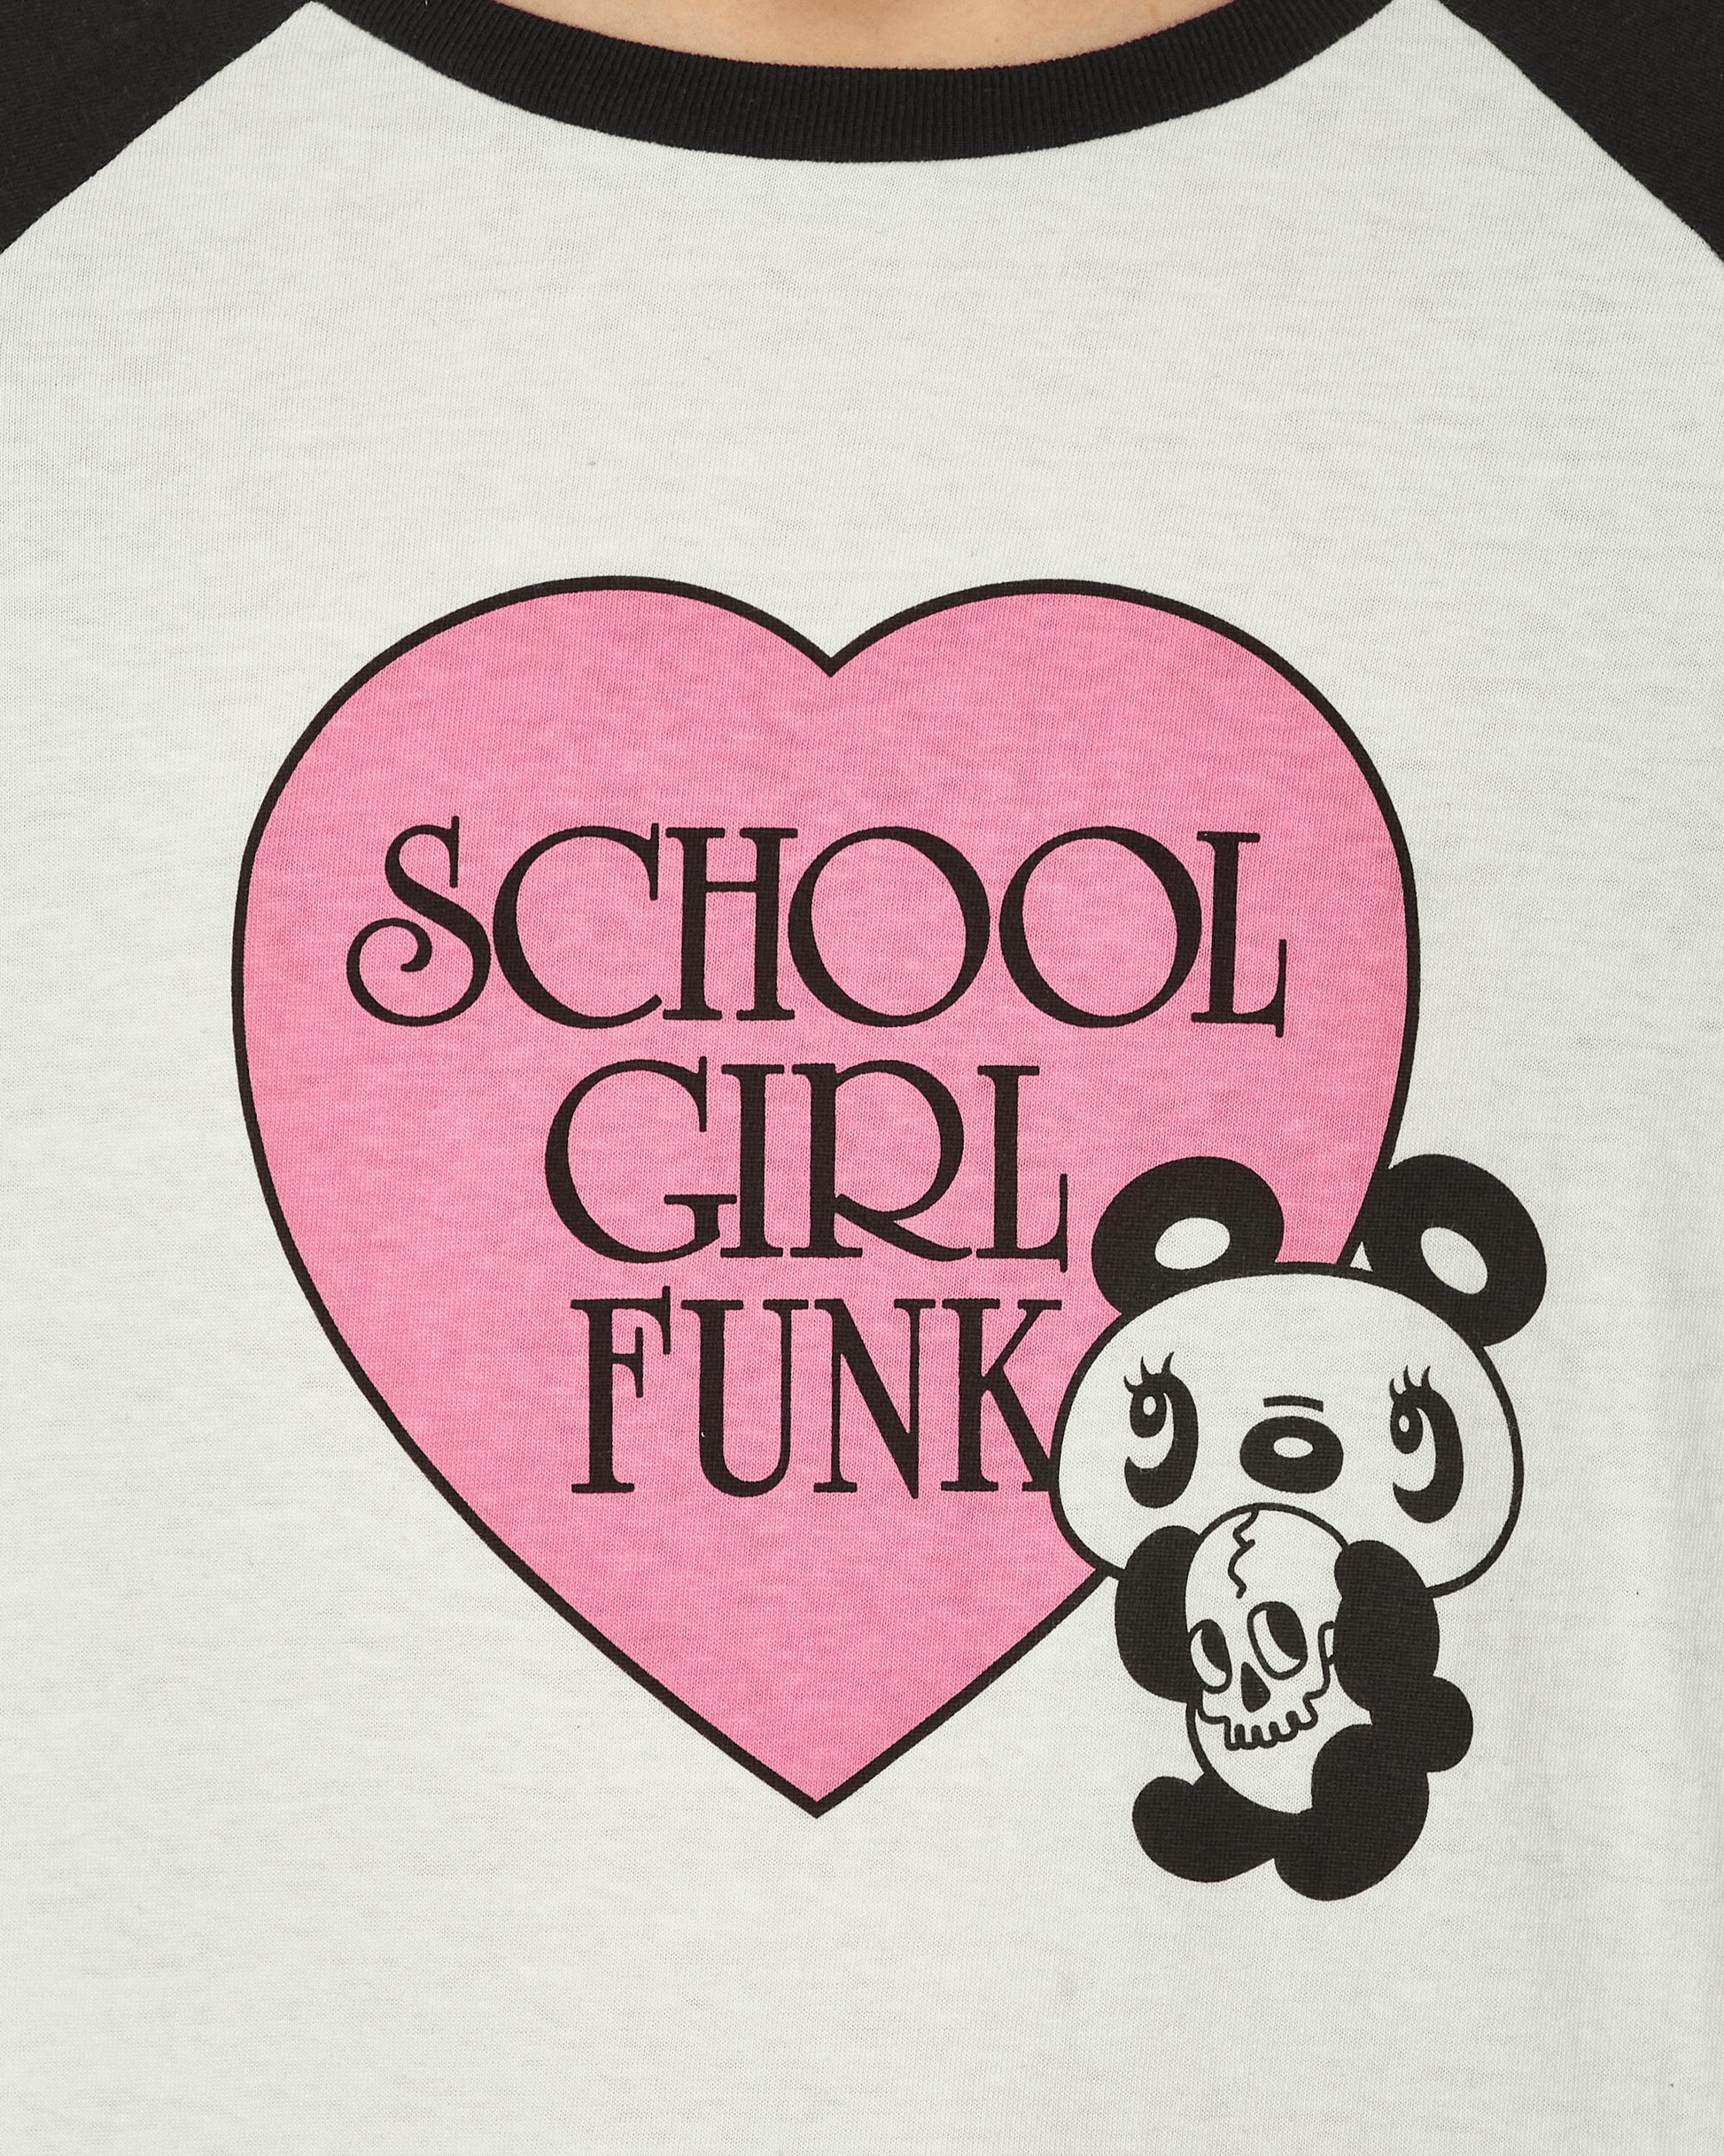 Hysteric Glamour Wmns School Girl Funk T-Shirt White T-Shirts Shortsleeve 01233CL109 WHITE